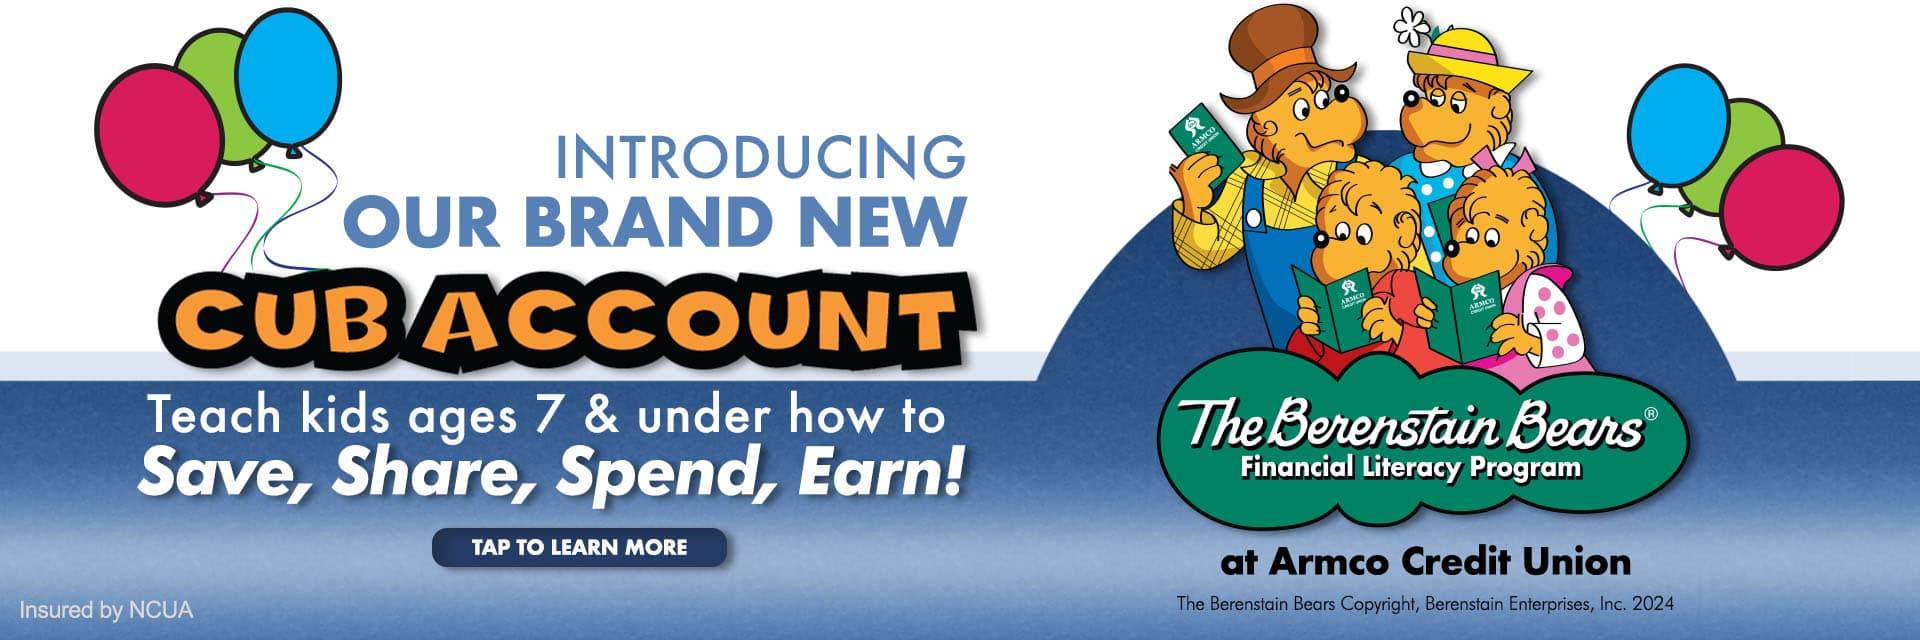 The Berenstain Bears® Financial Literacy Program at Armco Credit Union